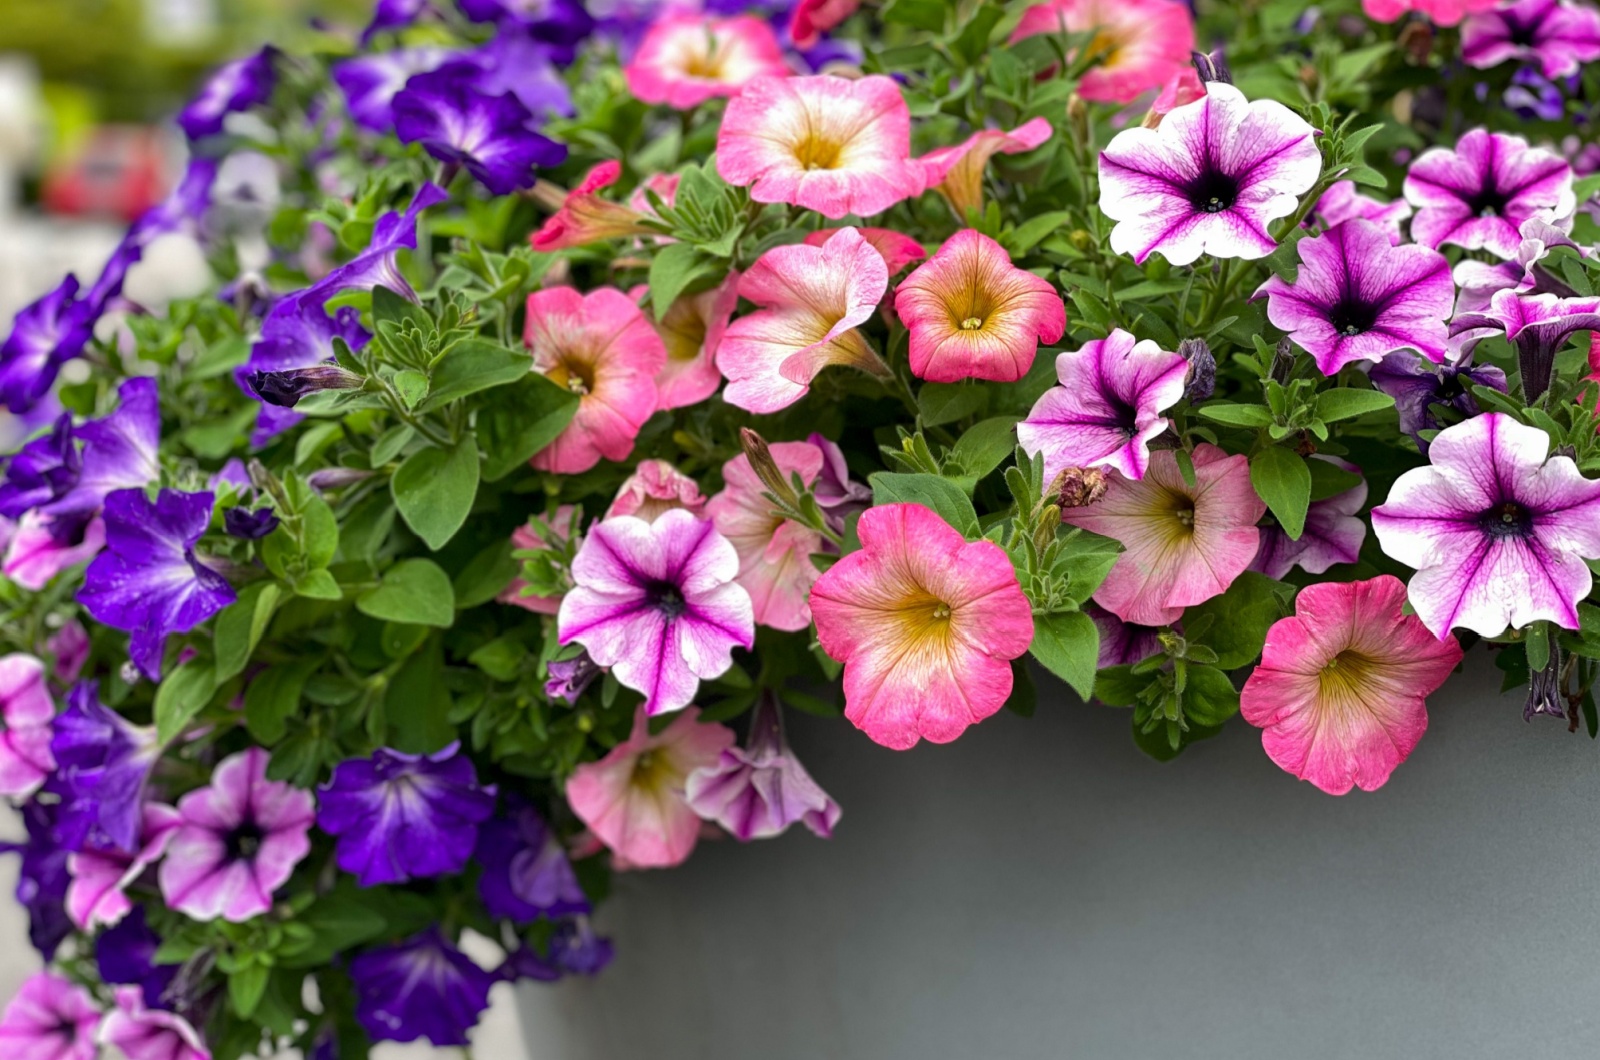 Prepare Petunias For Spectacular Blooms In Your Garden All Summer Long